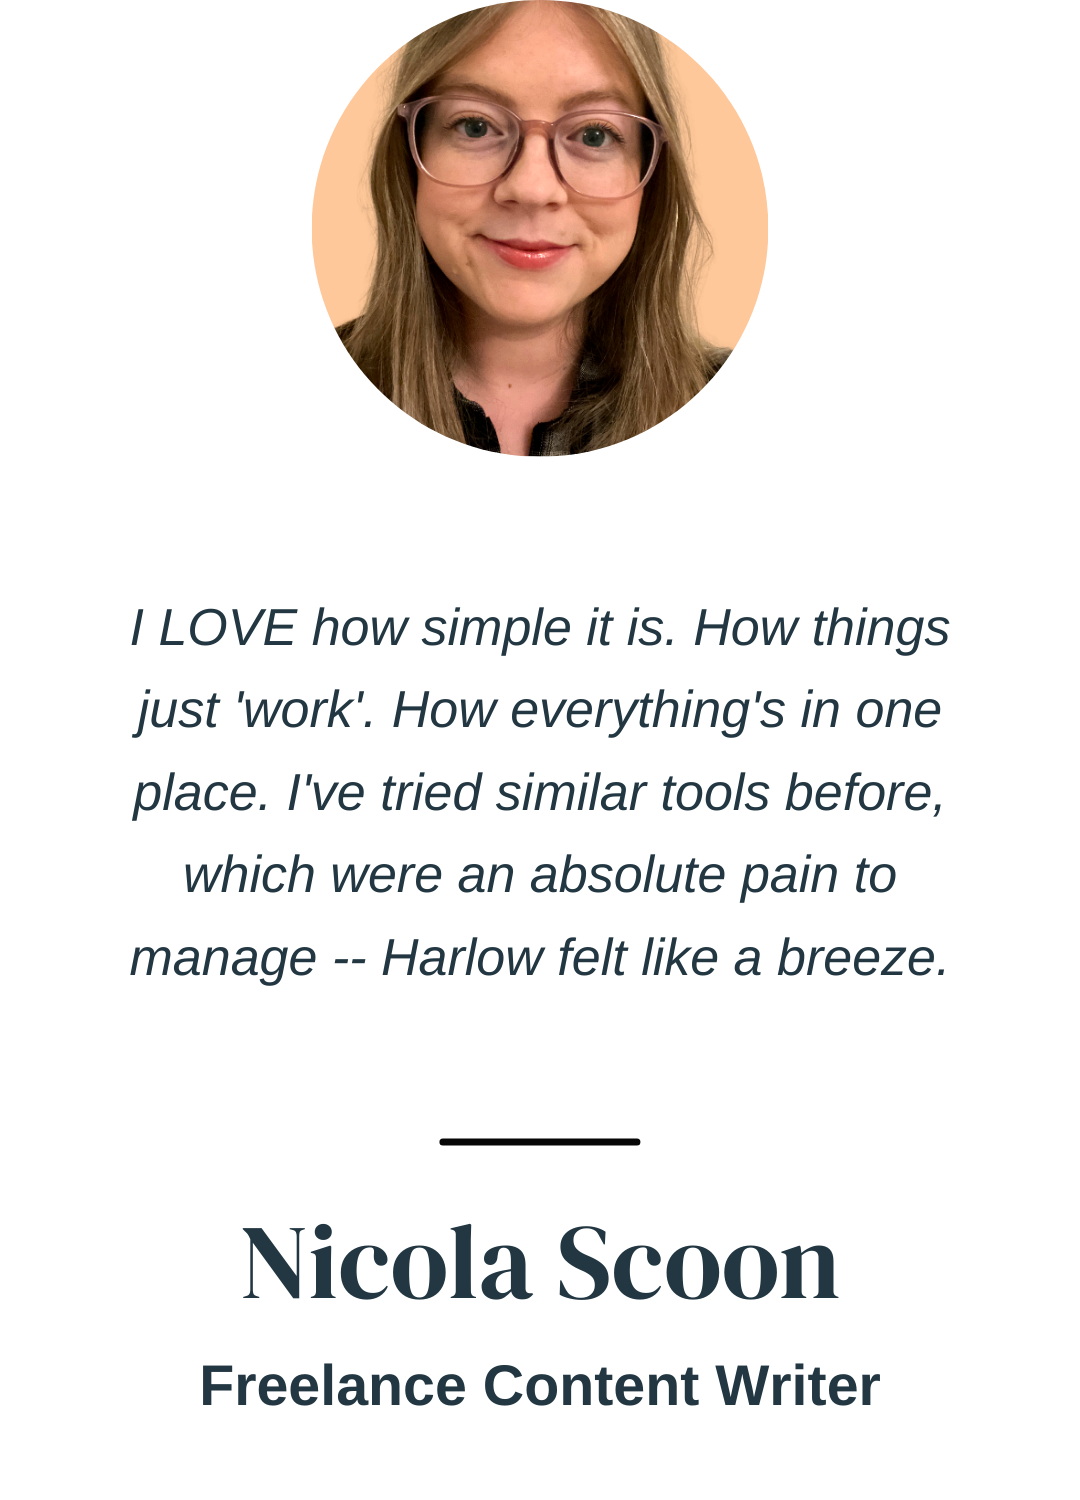 "I LOVE how simple it is. How things just 'work'. How everything's in one place. I've tried similar tools before, which were an absolute pain to manage -- Harlow felt like a breeze." Nicola Scoon, Freelance Content Writer